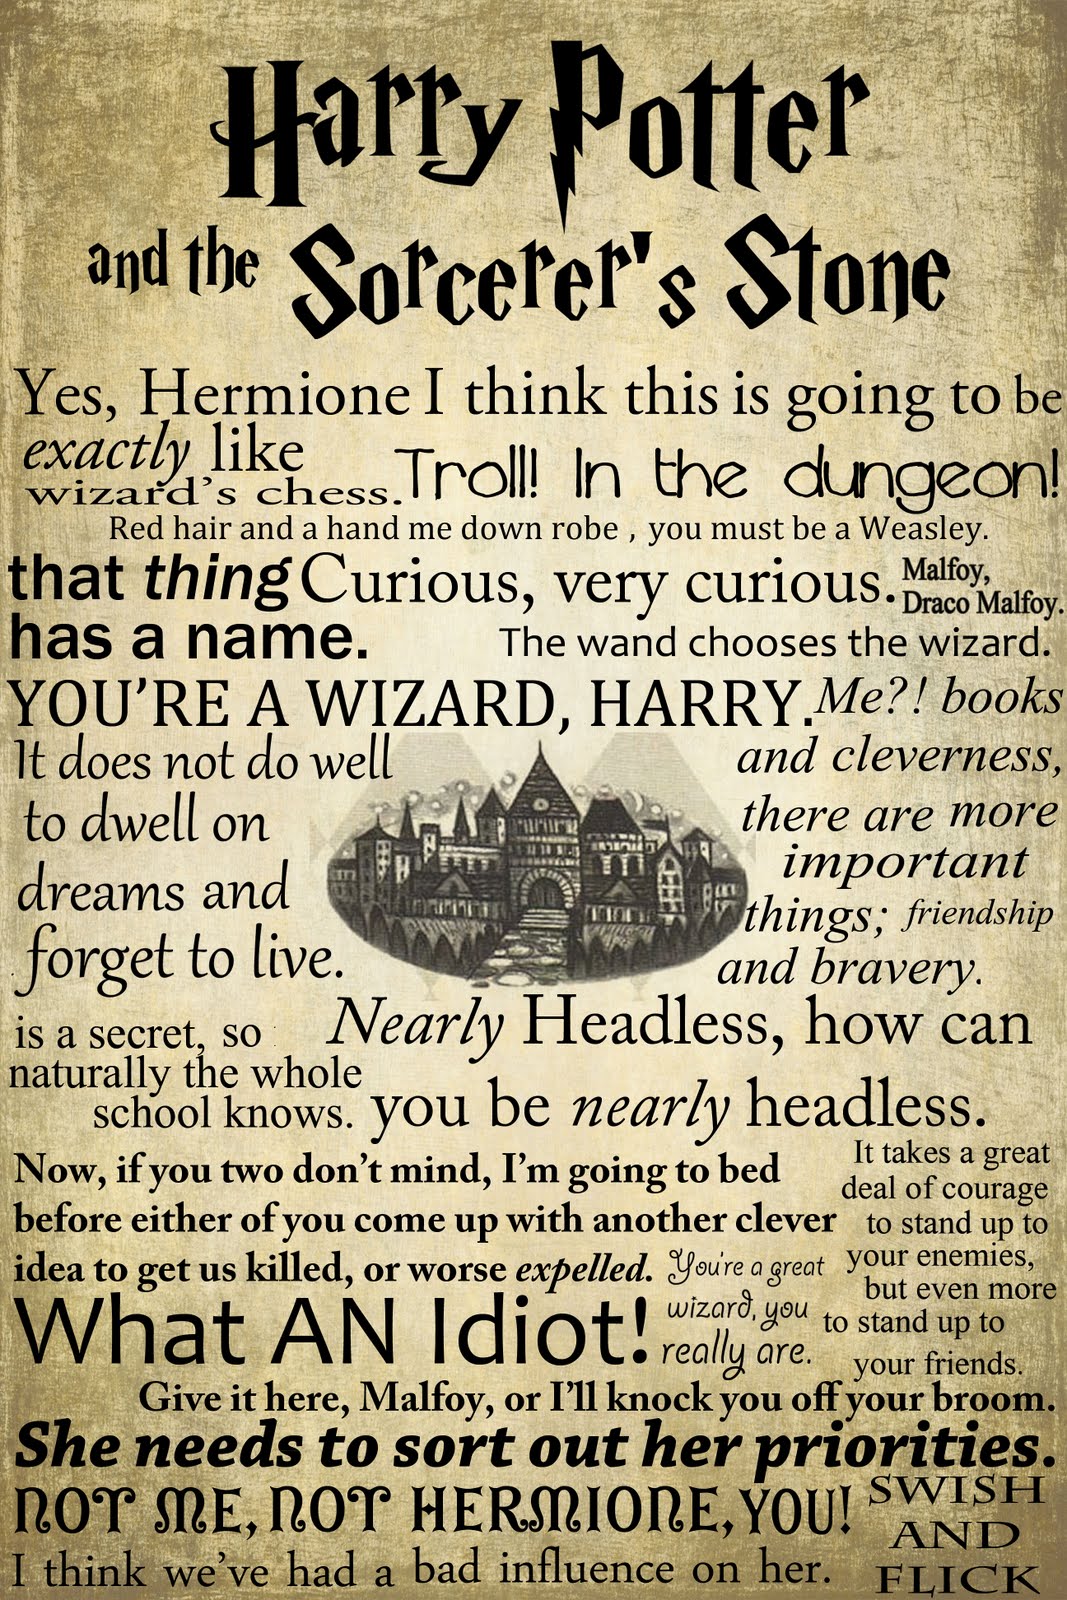 My Favorite Quotes From All The Harry Potter Movies - HD Wallpaper 